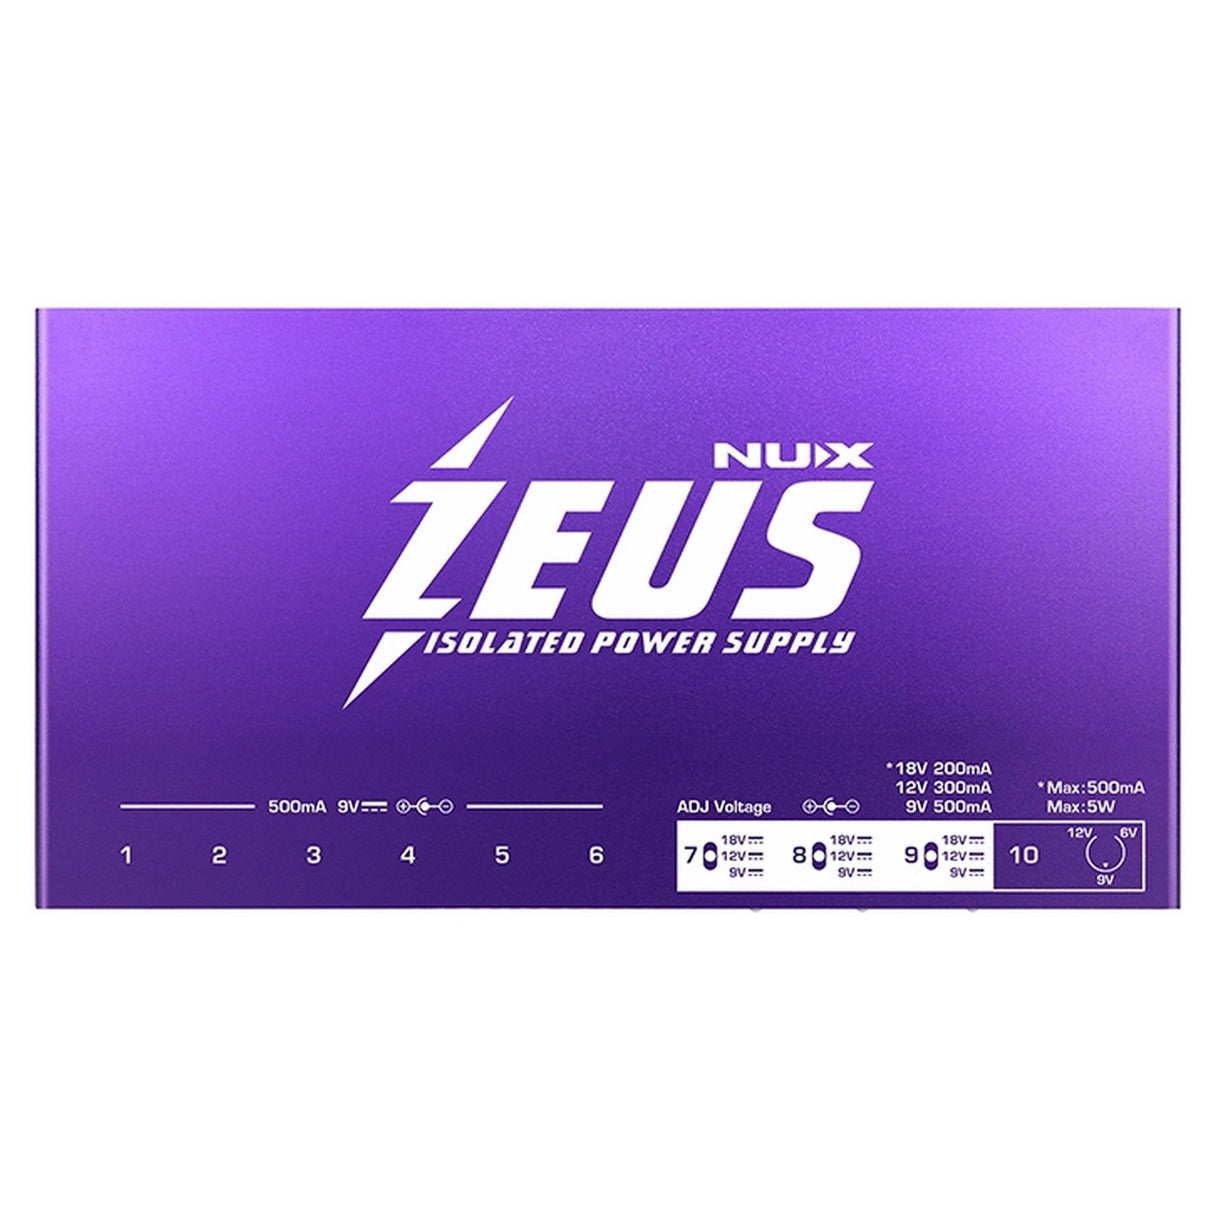 Nux Zeus 6 9V Outputs Isolated Power Supply